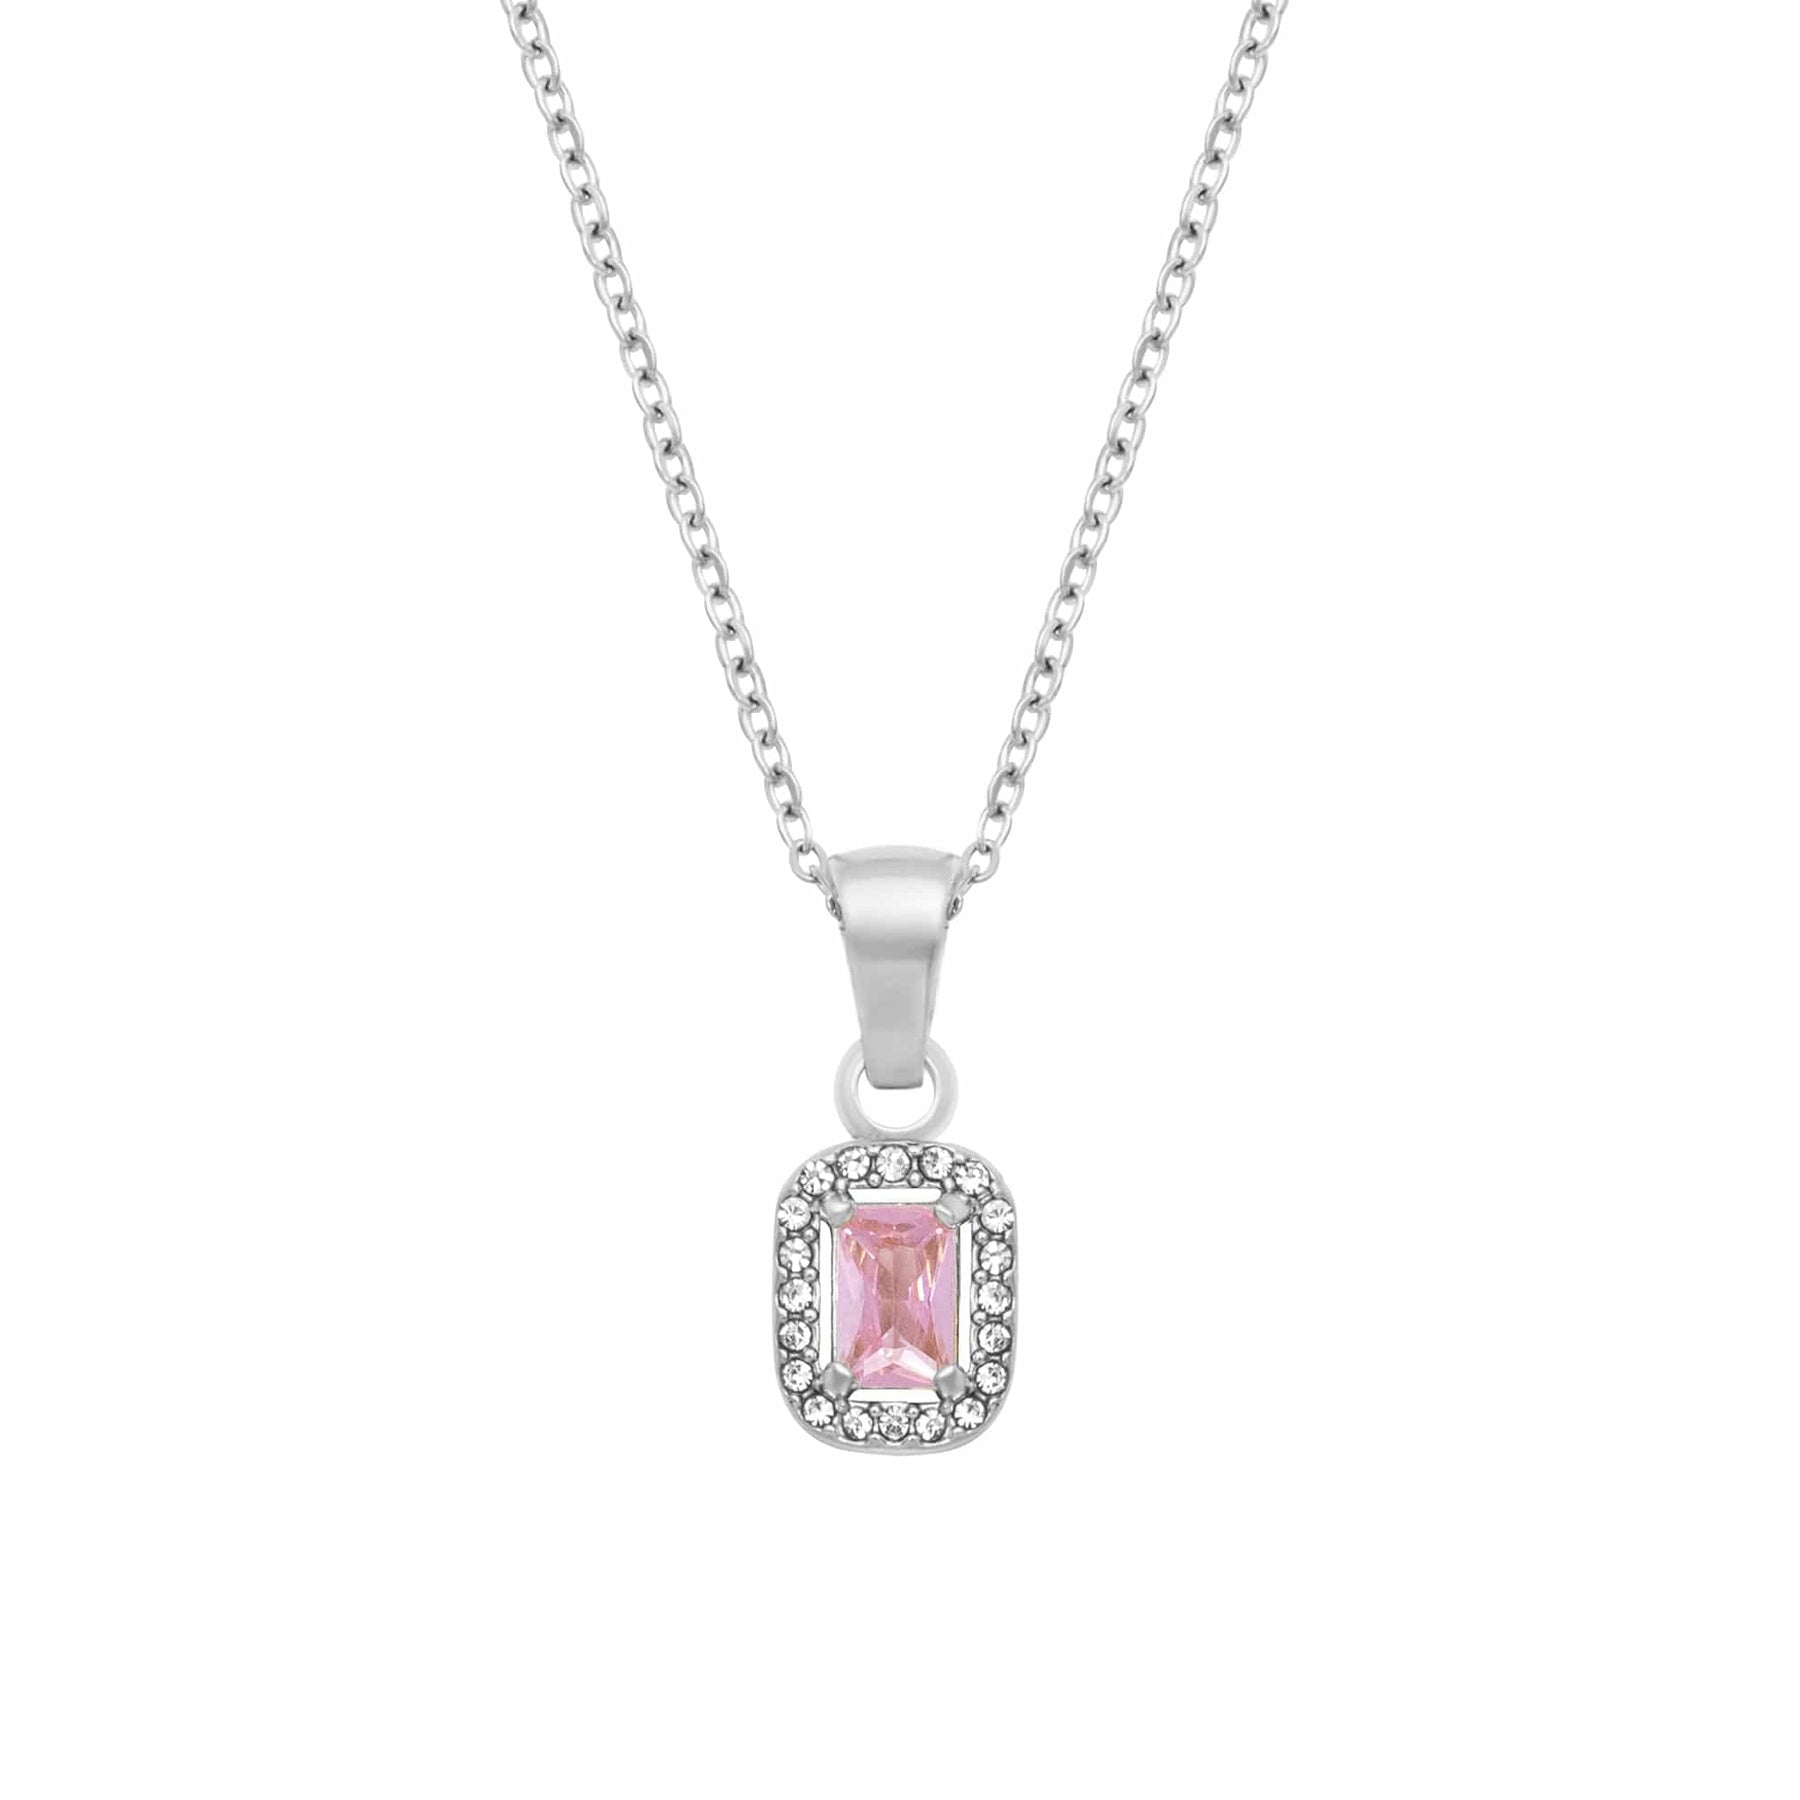 BohoMoon Stainless Steel Fearless Necklace Silver / Pink